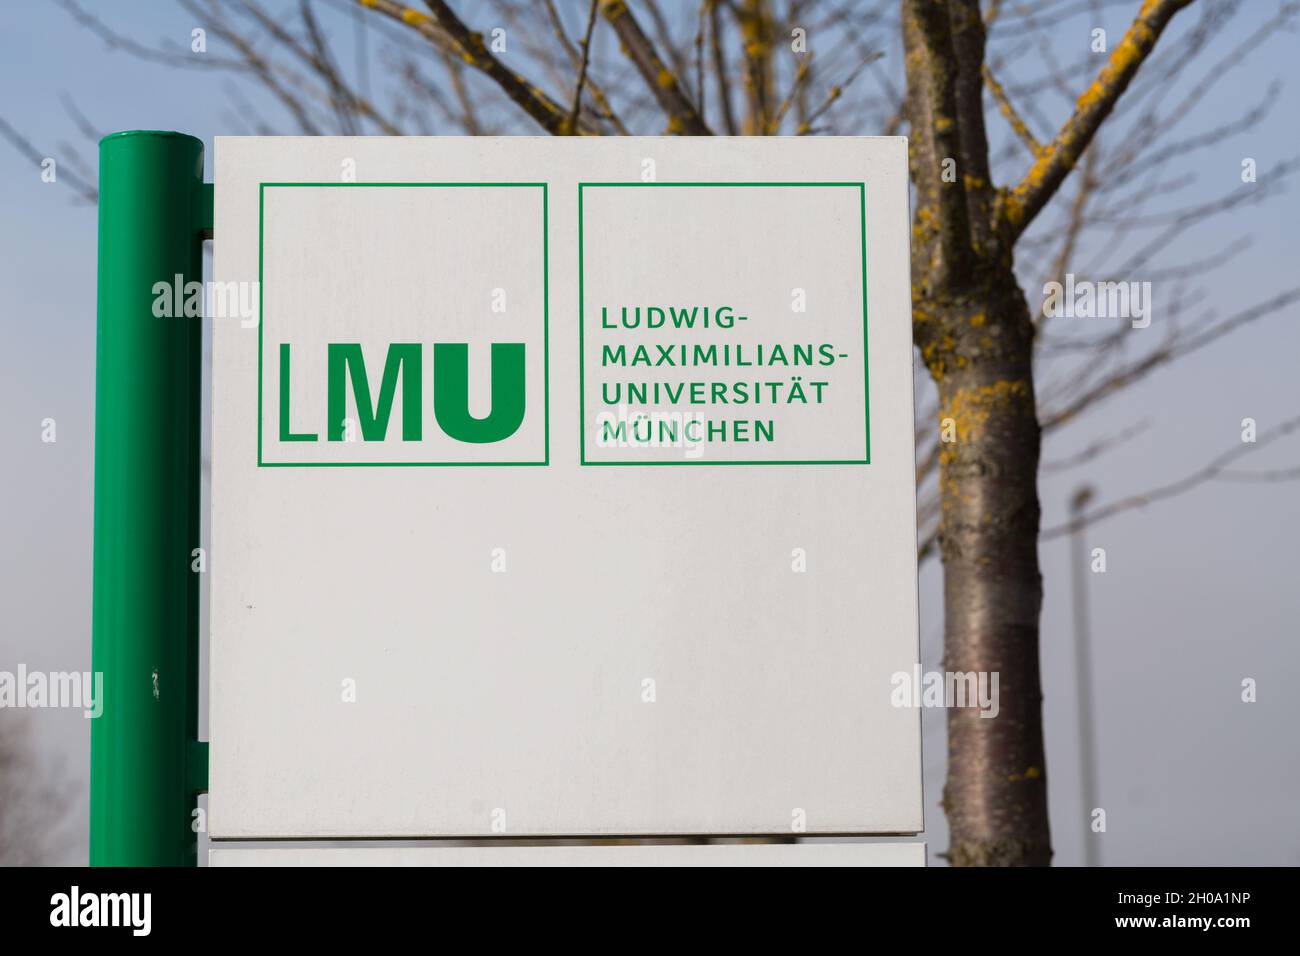 Martinsried, Germany - Mar 9, 2021: Sign at LMU - Ludwig-Maximilians-Universität München. Famous university located in Munich, Germany. Stock Photo